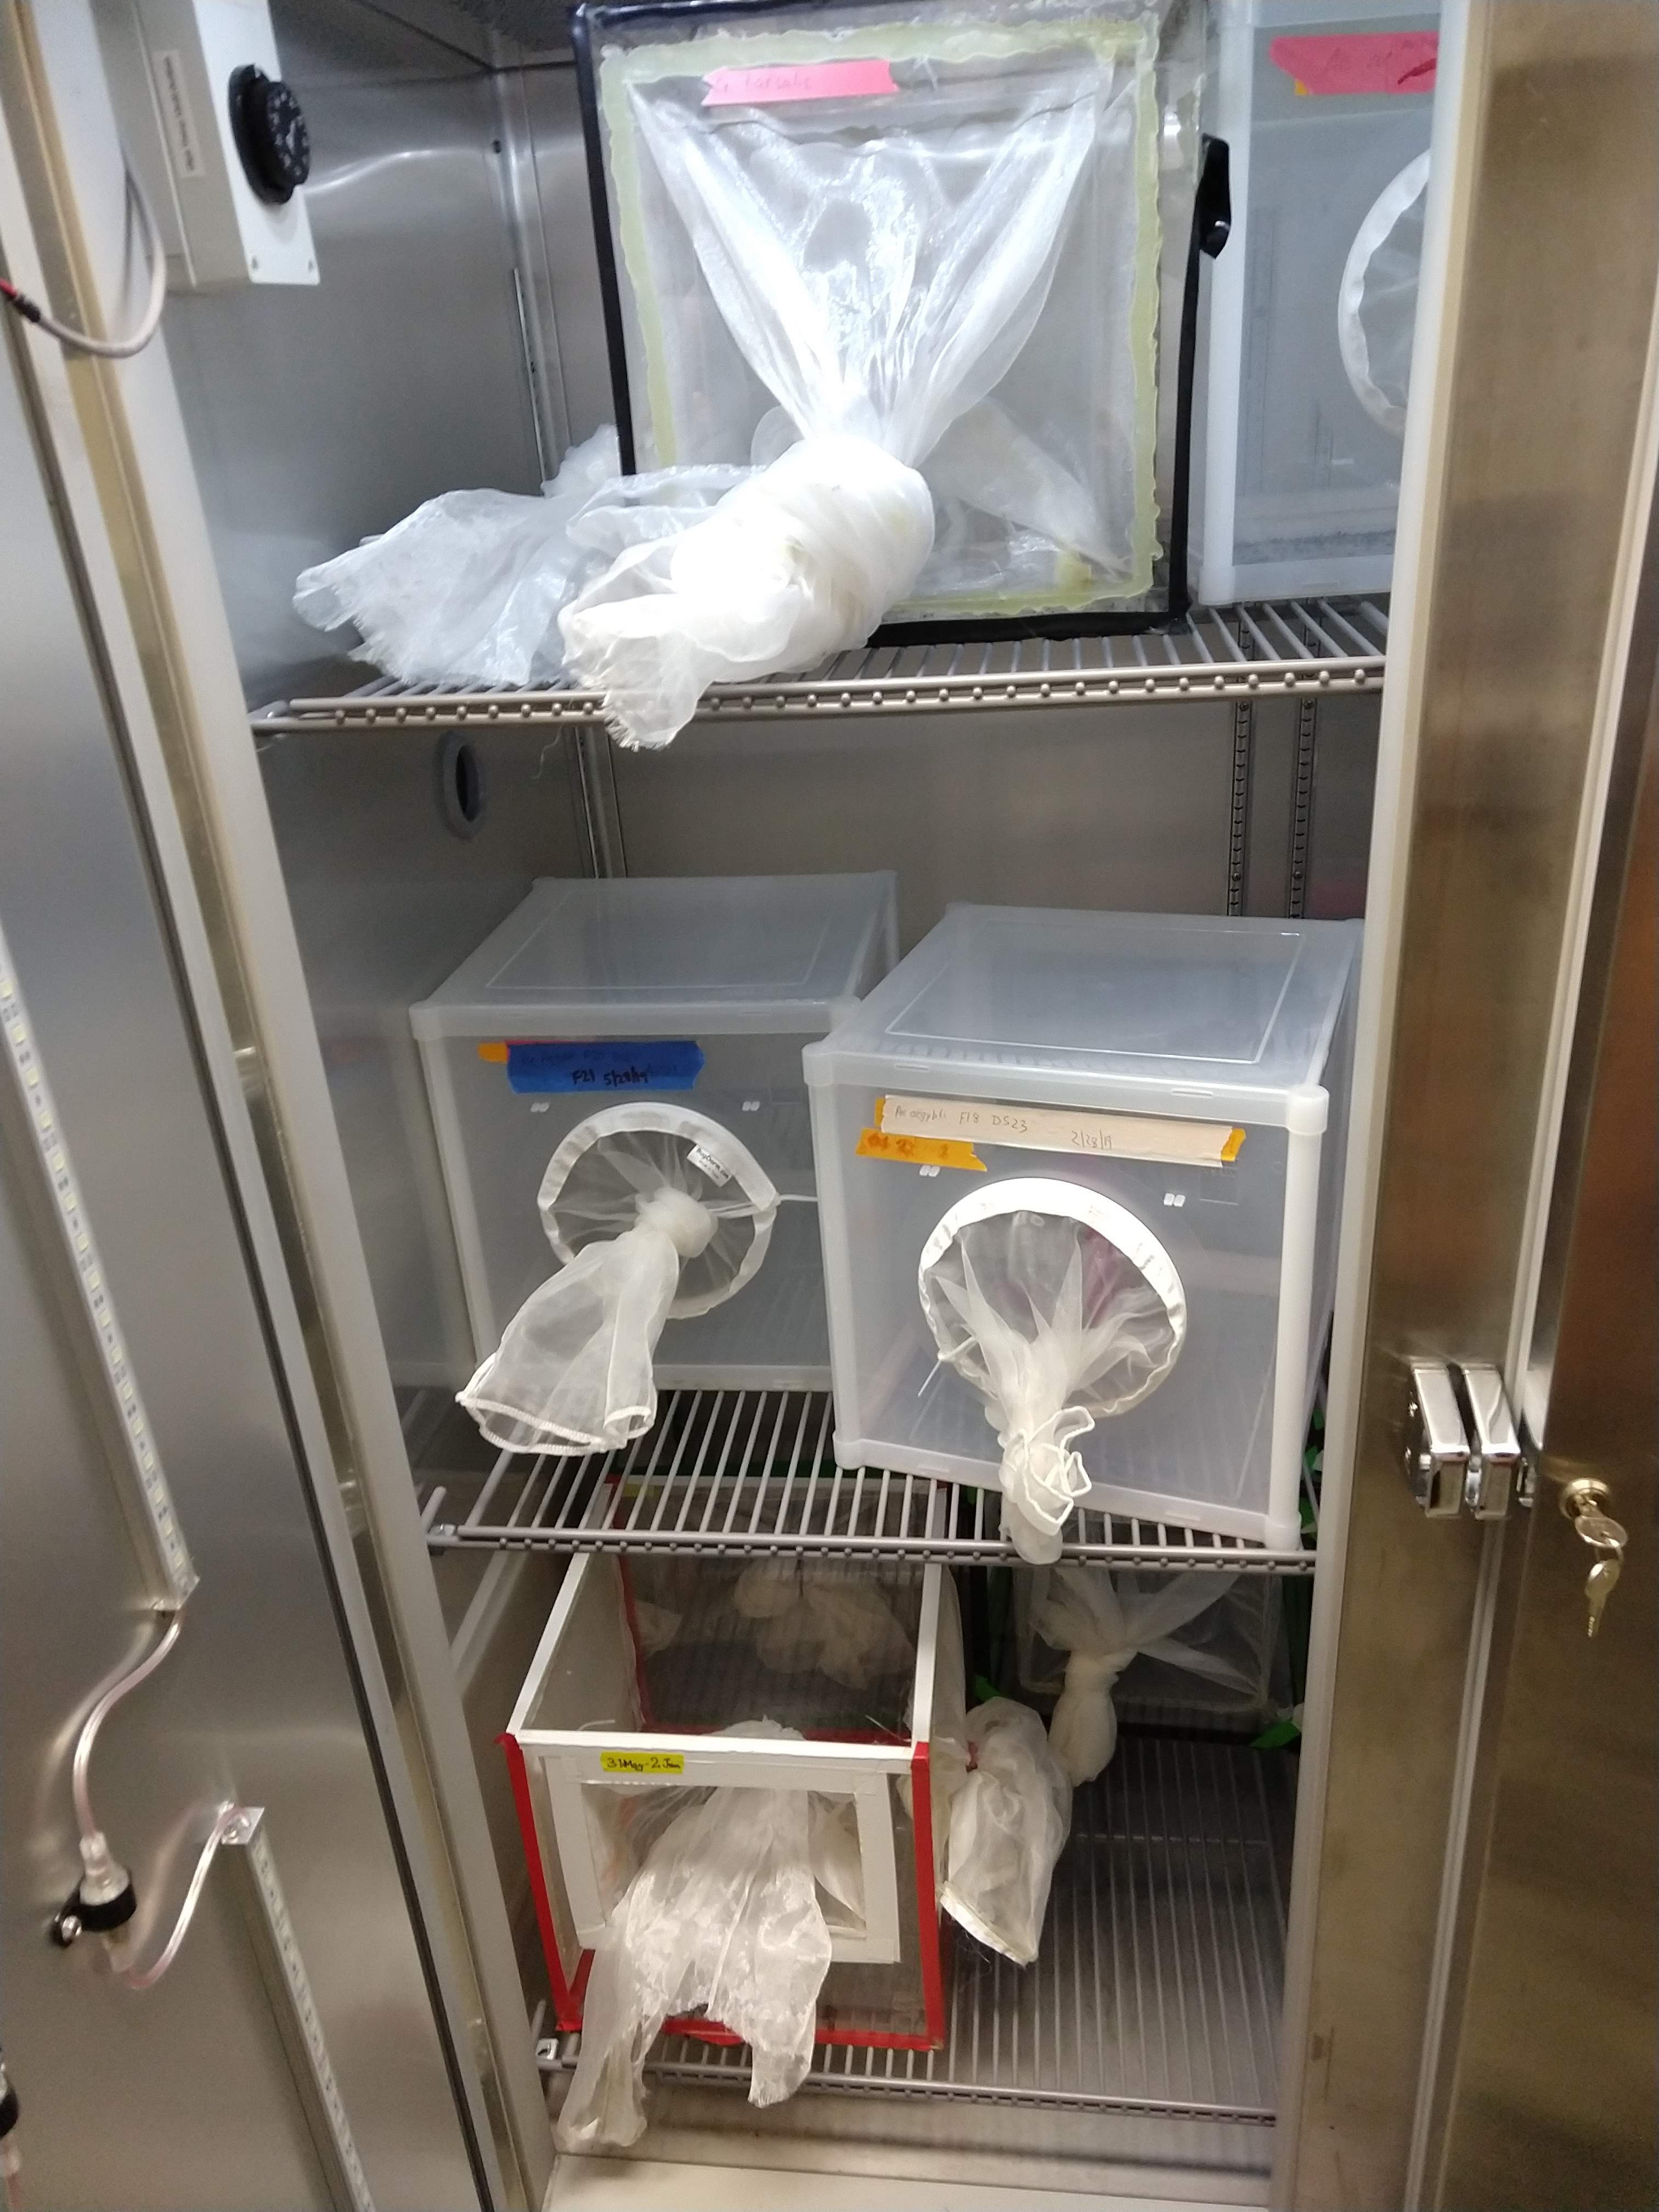 Have you ever wondered how malaria scientists raise mosquitoes to be used for testing? These mosquito boxes are kept in a temperature controlled "fridge" that is warm, not cool.